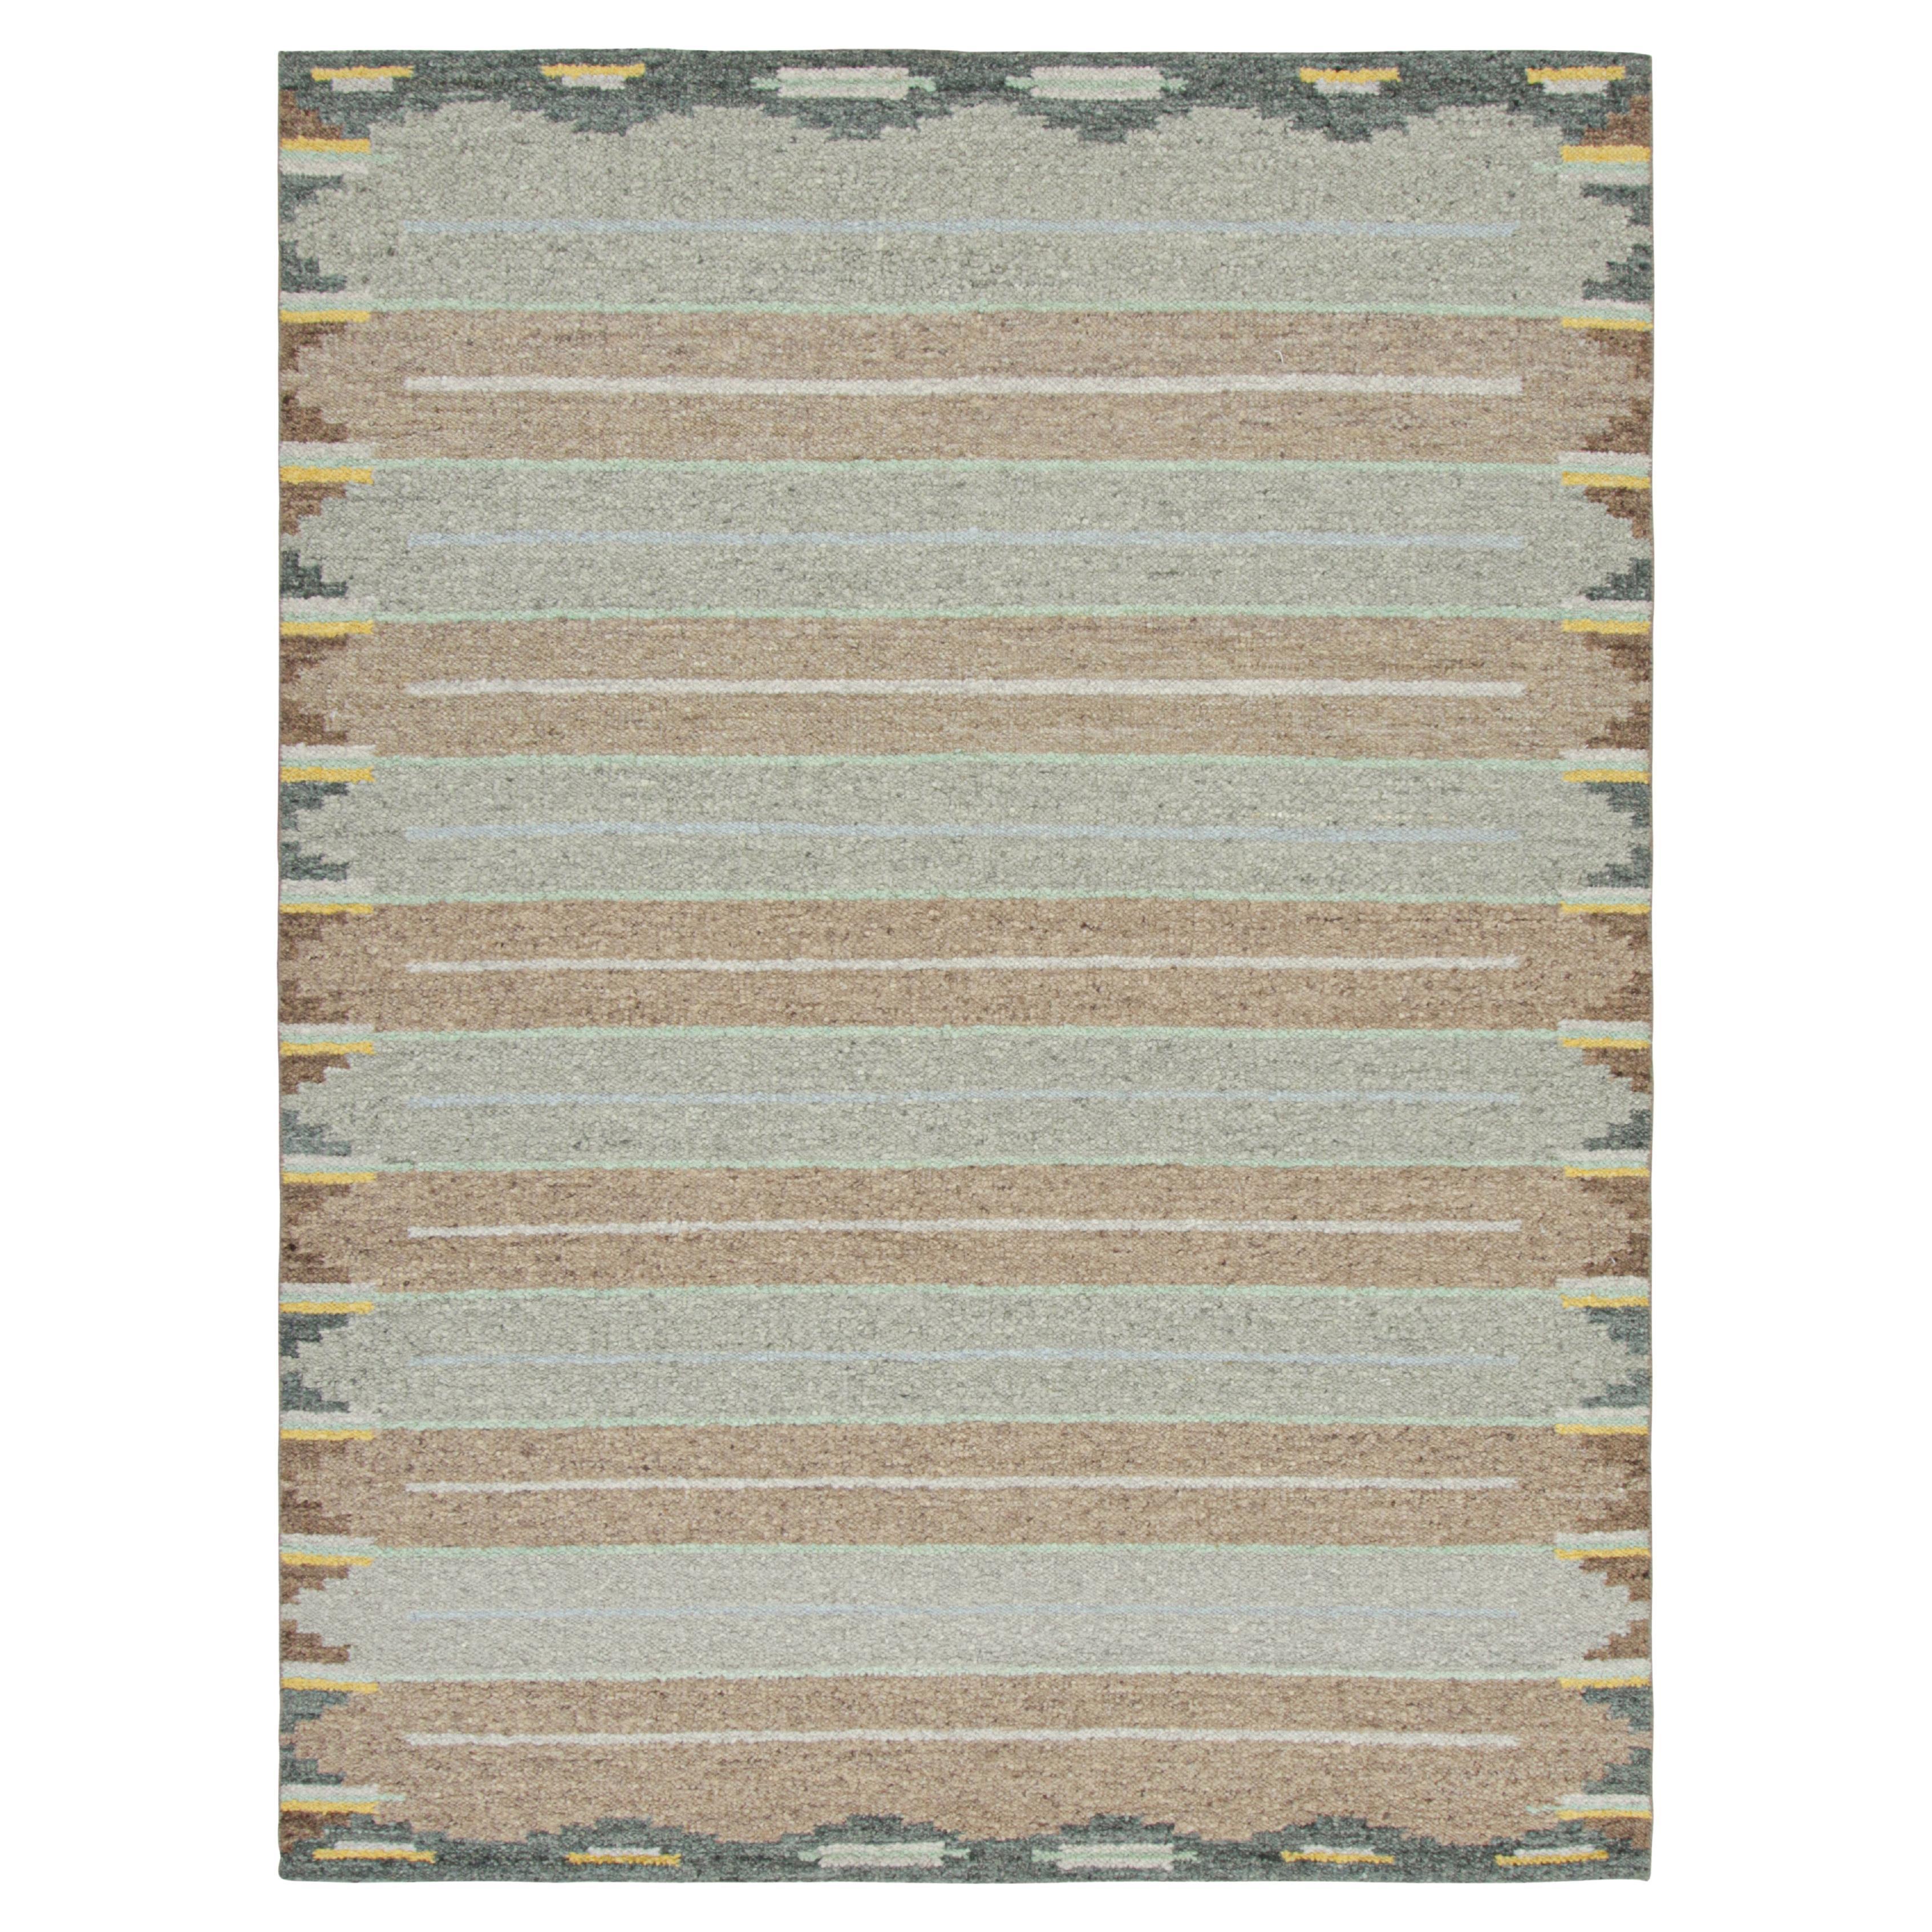 Rug & Kilim’s Scandinavian Style Rug with Brown and Green Geometric Patterns For Sale